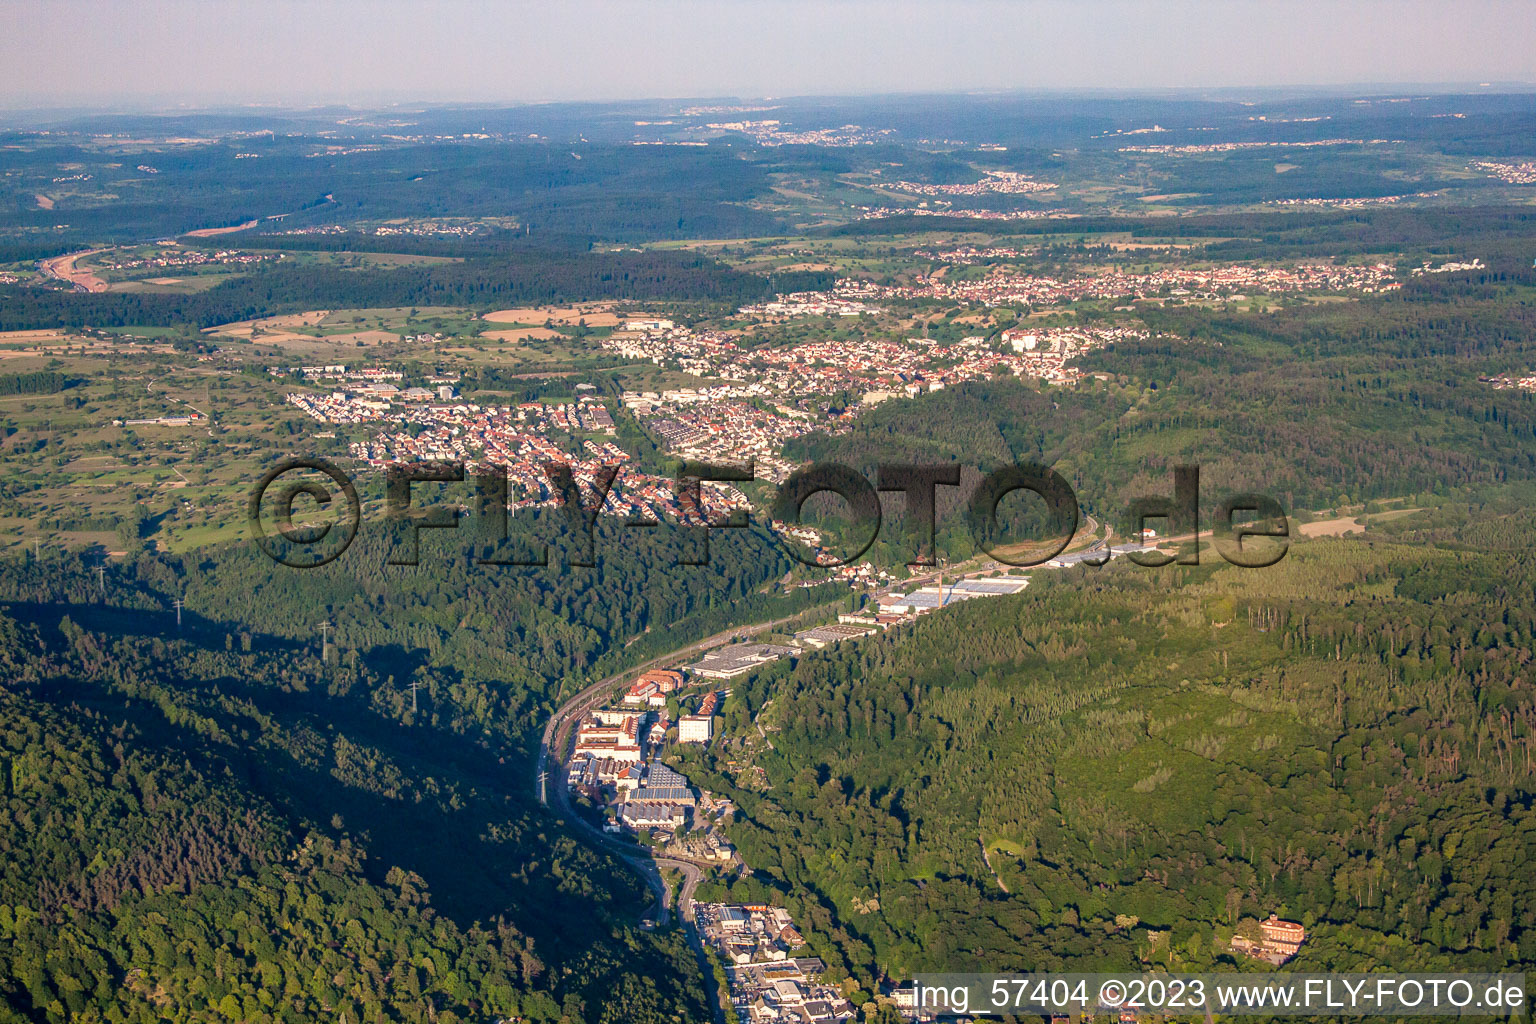 From the west in the district Busenbach in Waldbronn in the state Baden-Wuerttemberg, Germany from above